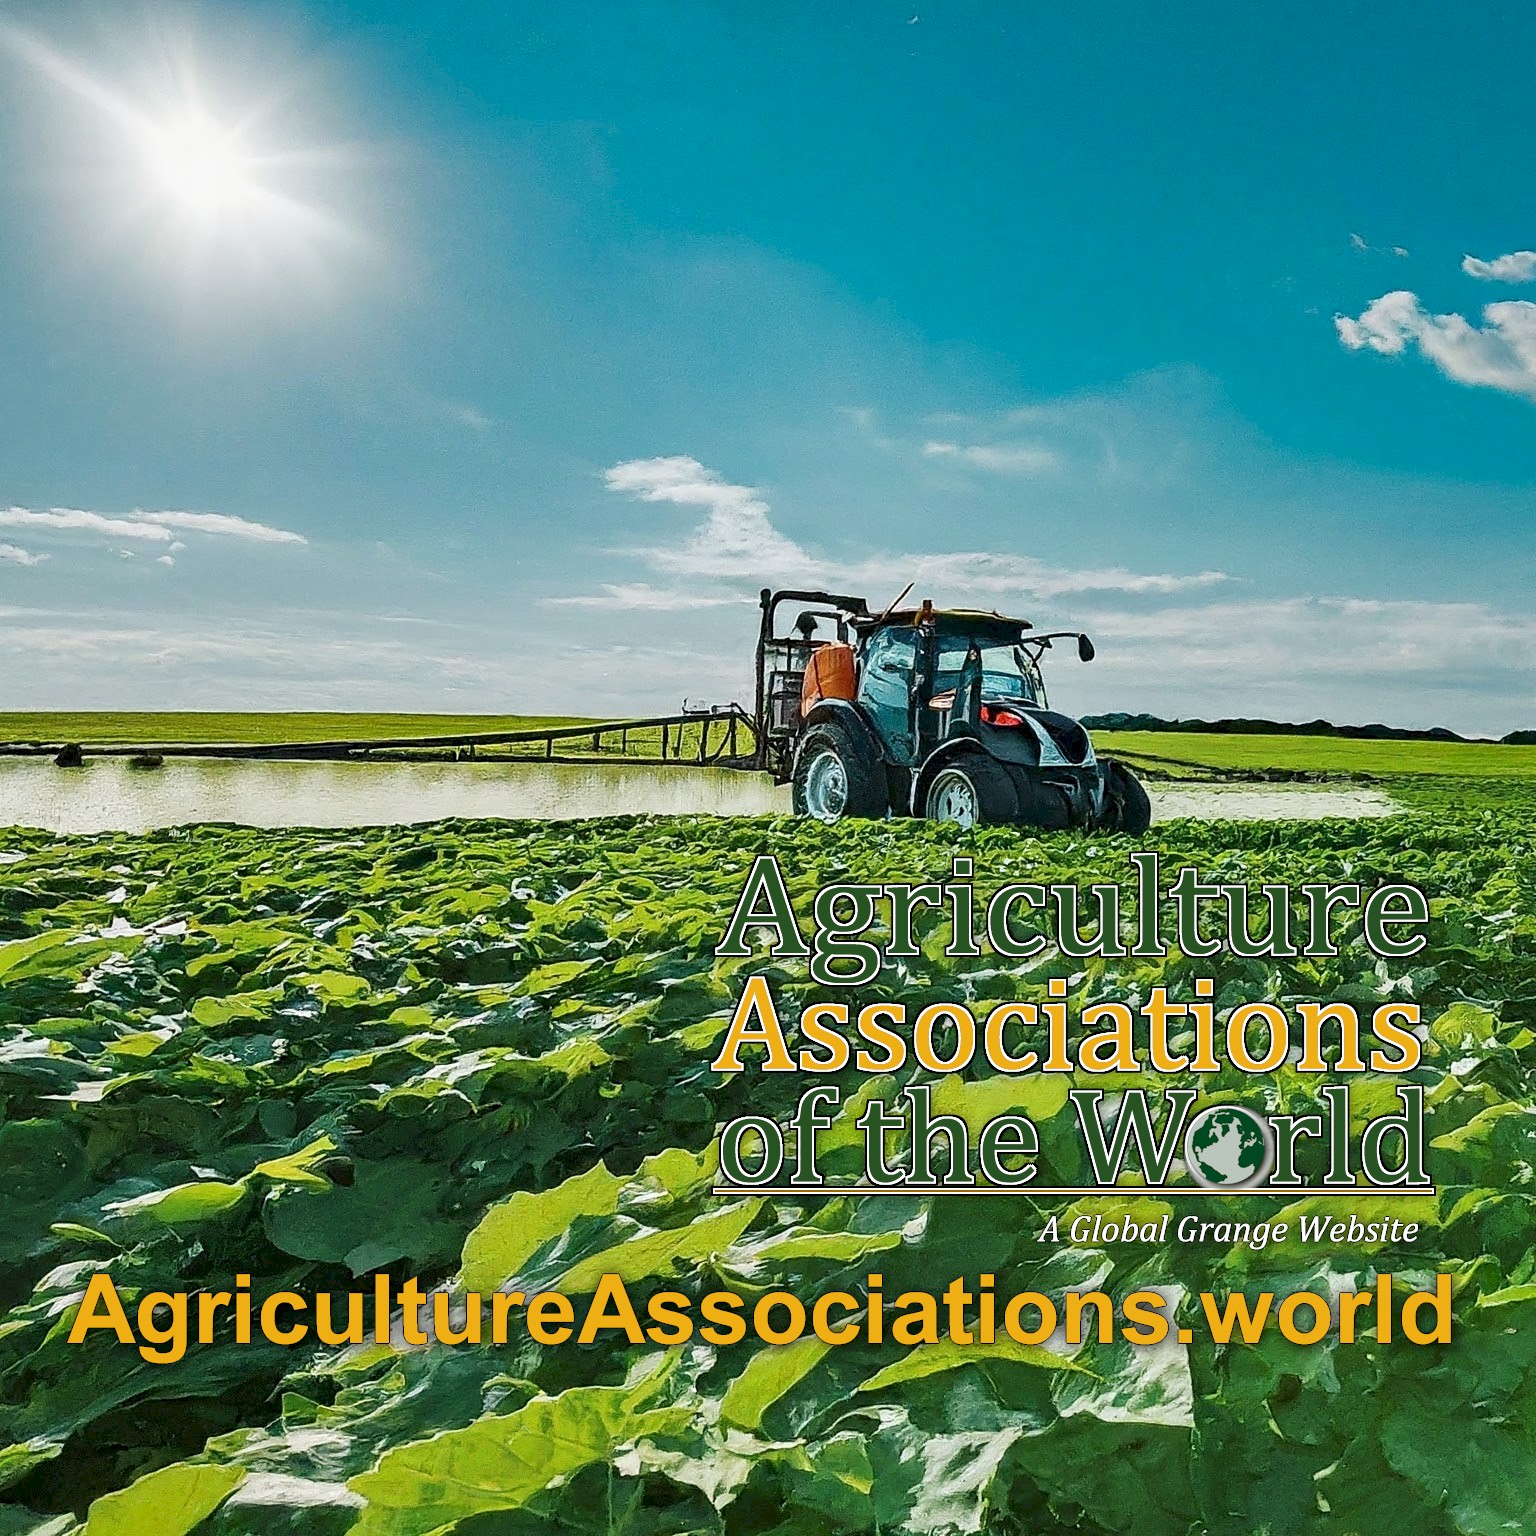 Supporting Agricultural Associations